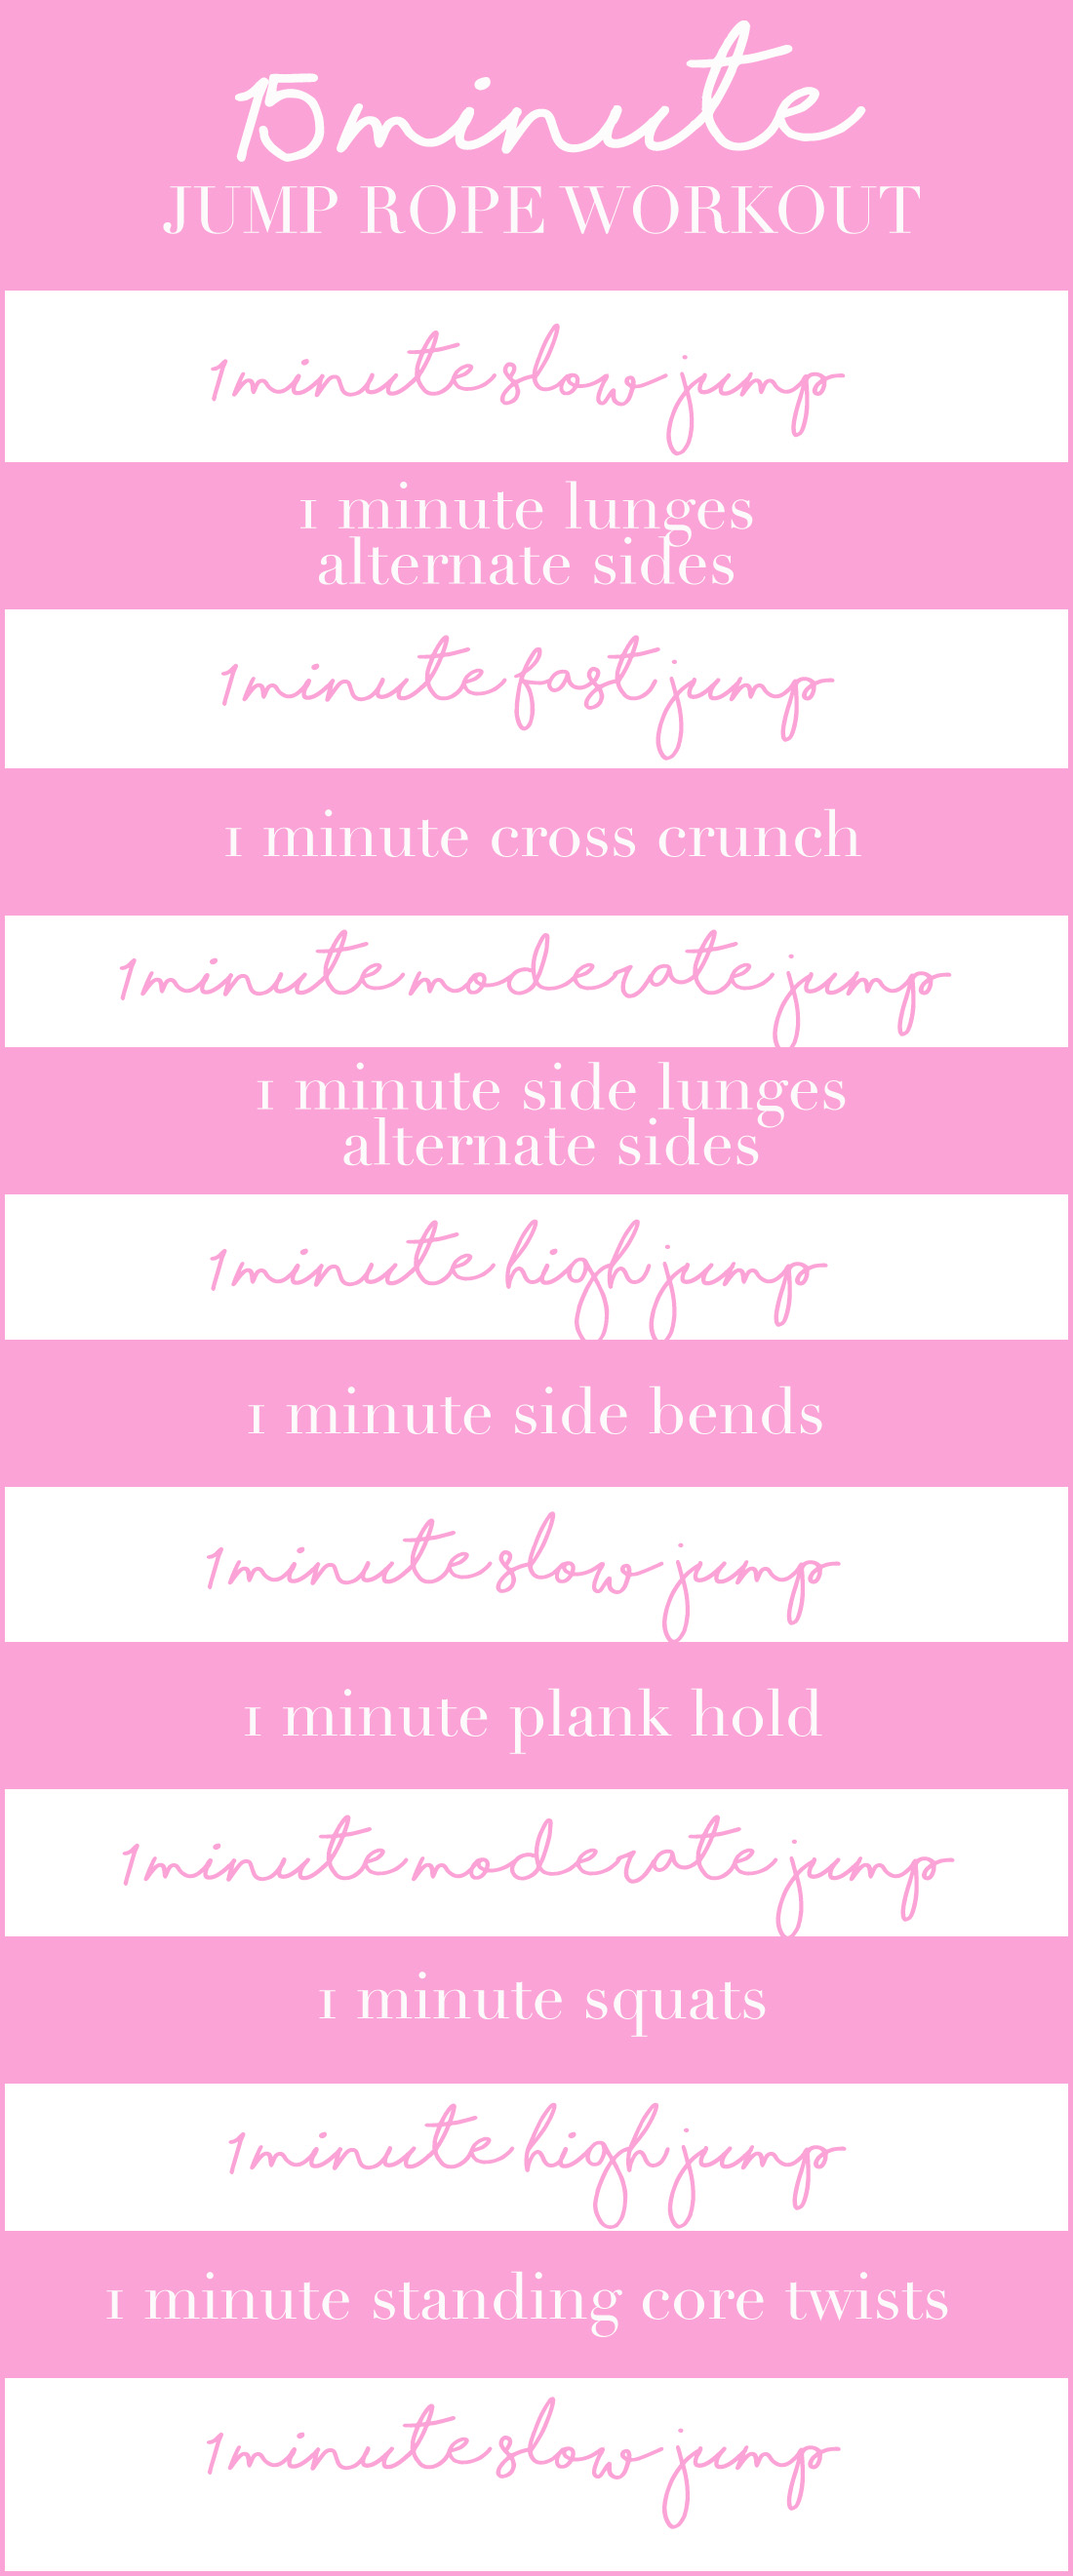 15 minute jump rope workout